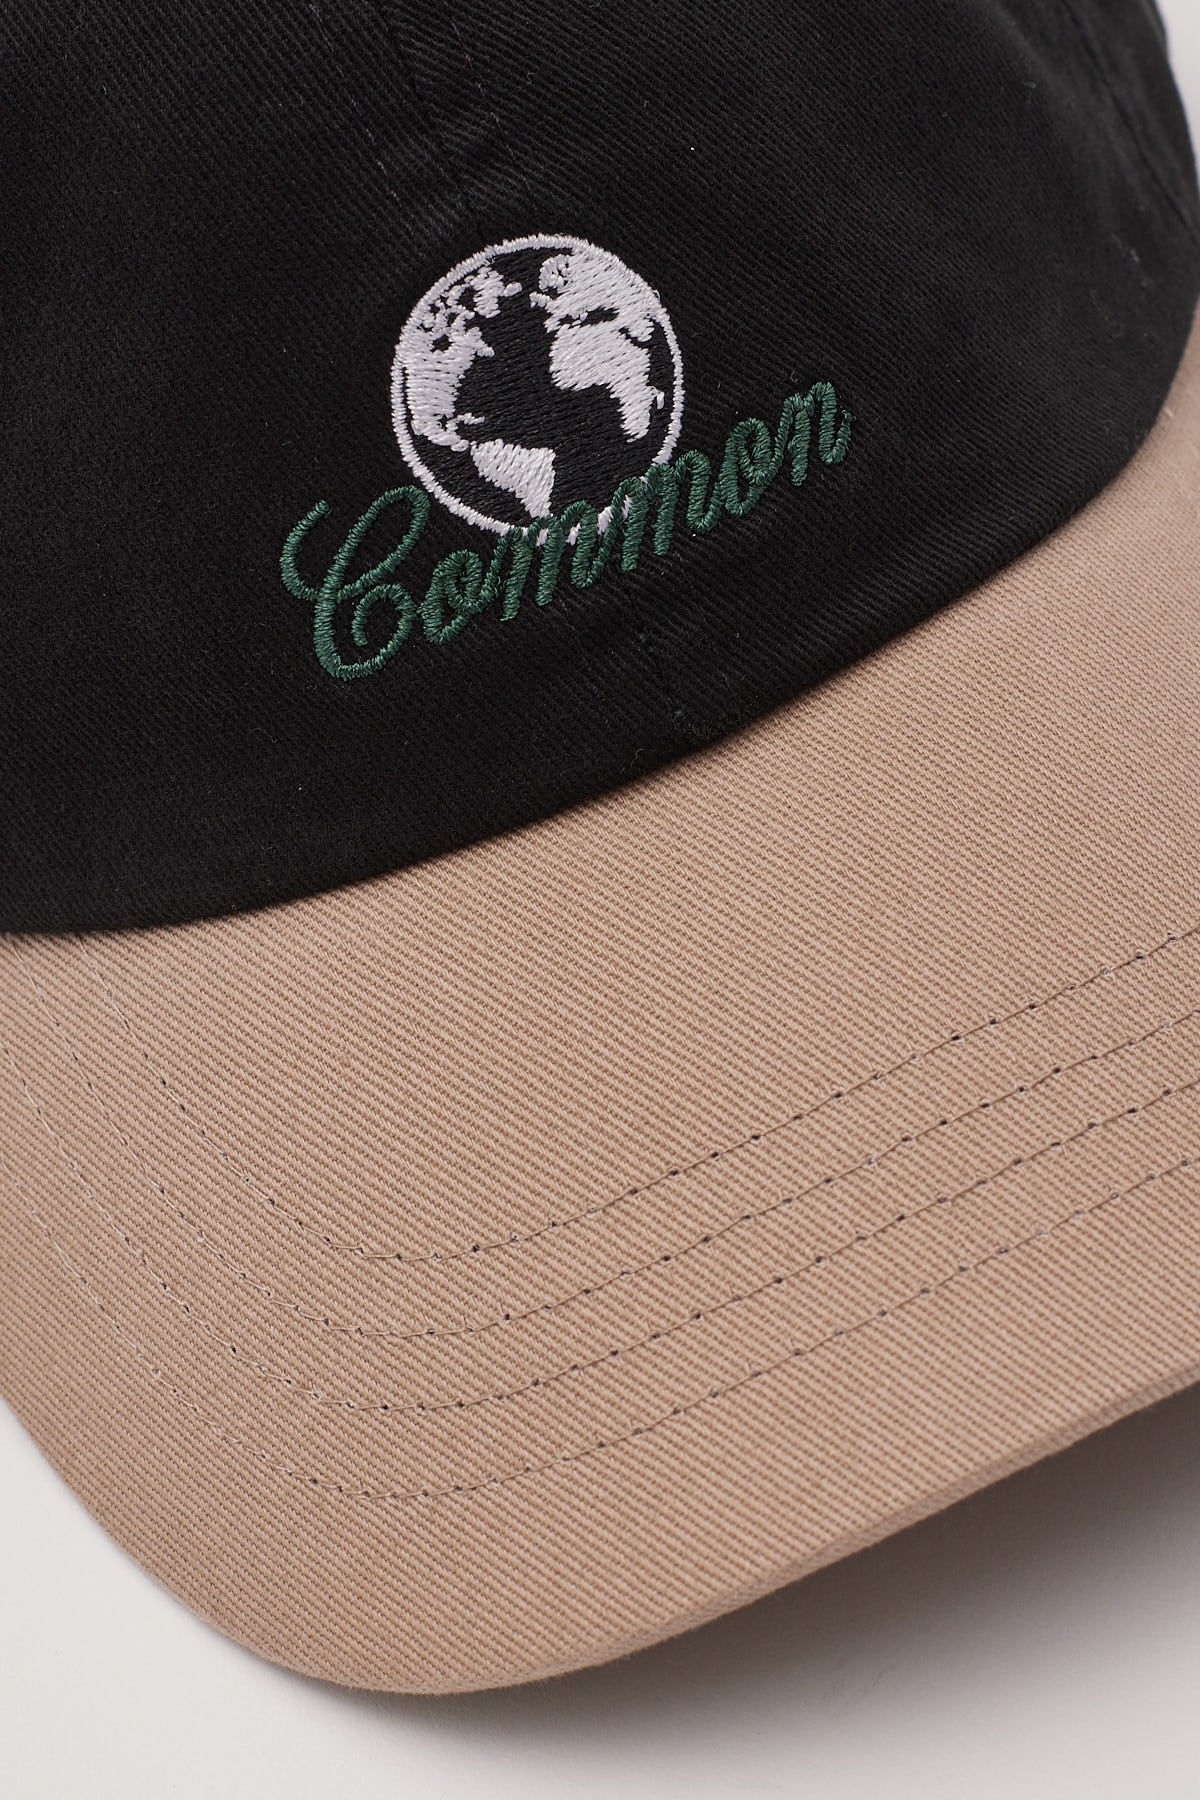 Common Need State Dad Cap Black/Brown